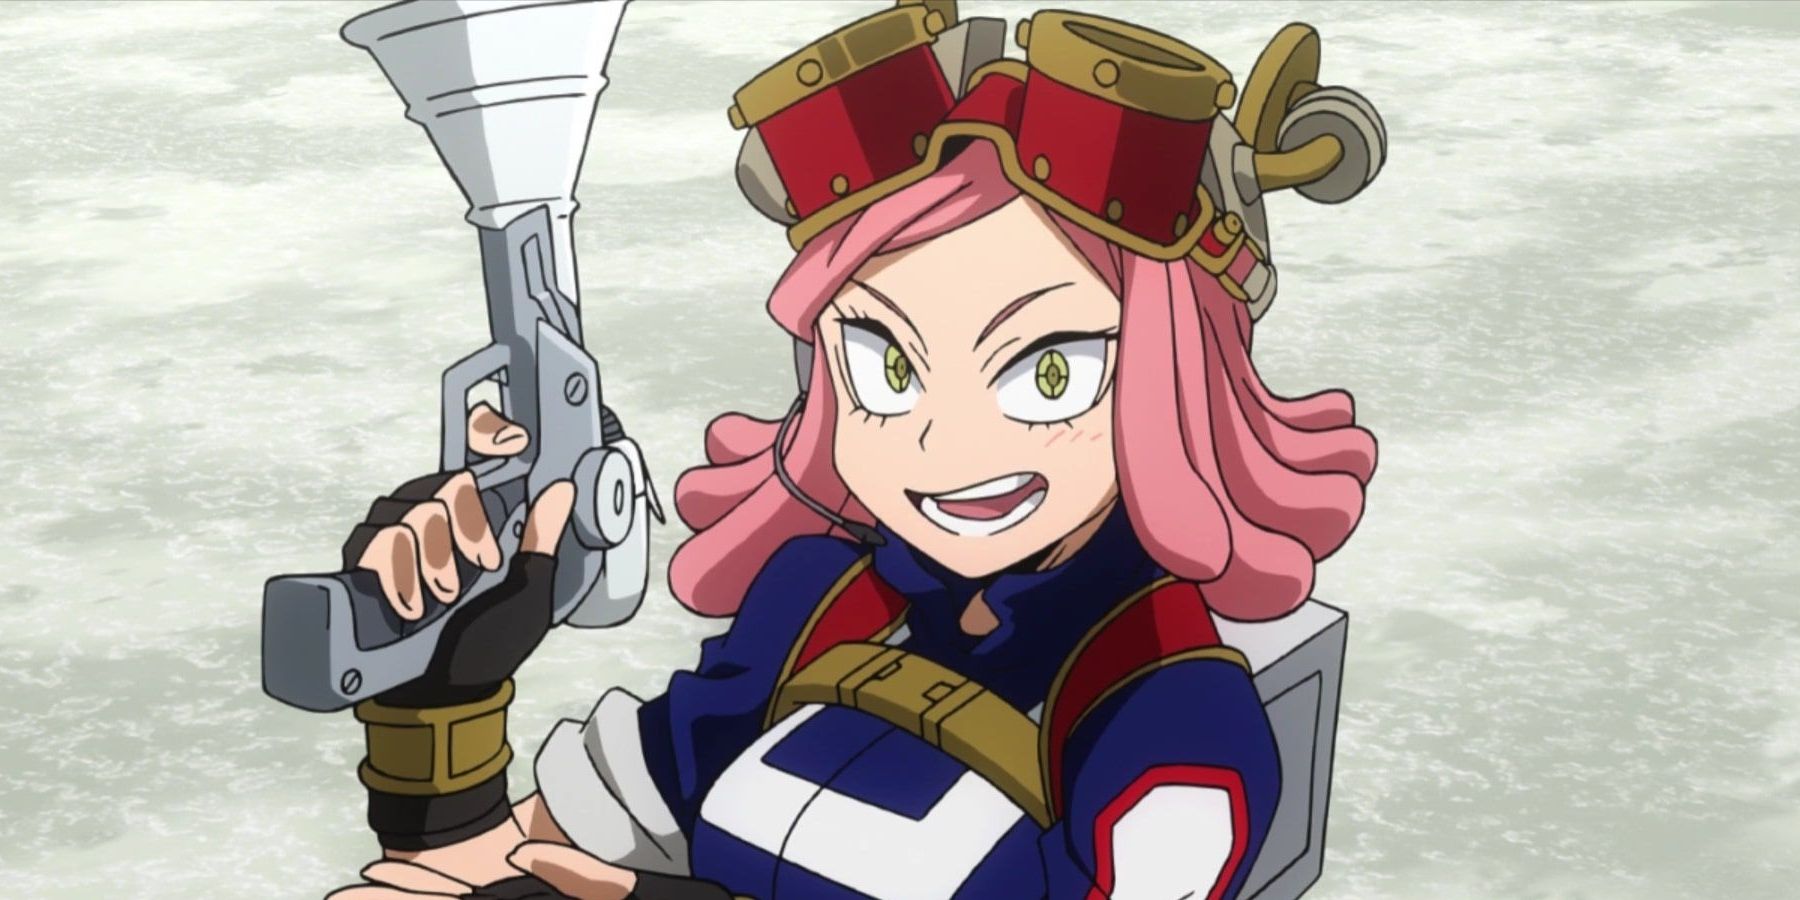 Mei Hatsume with her invention